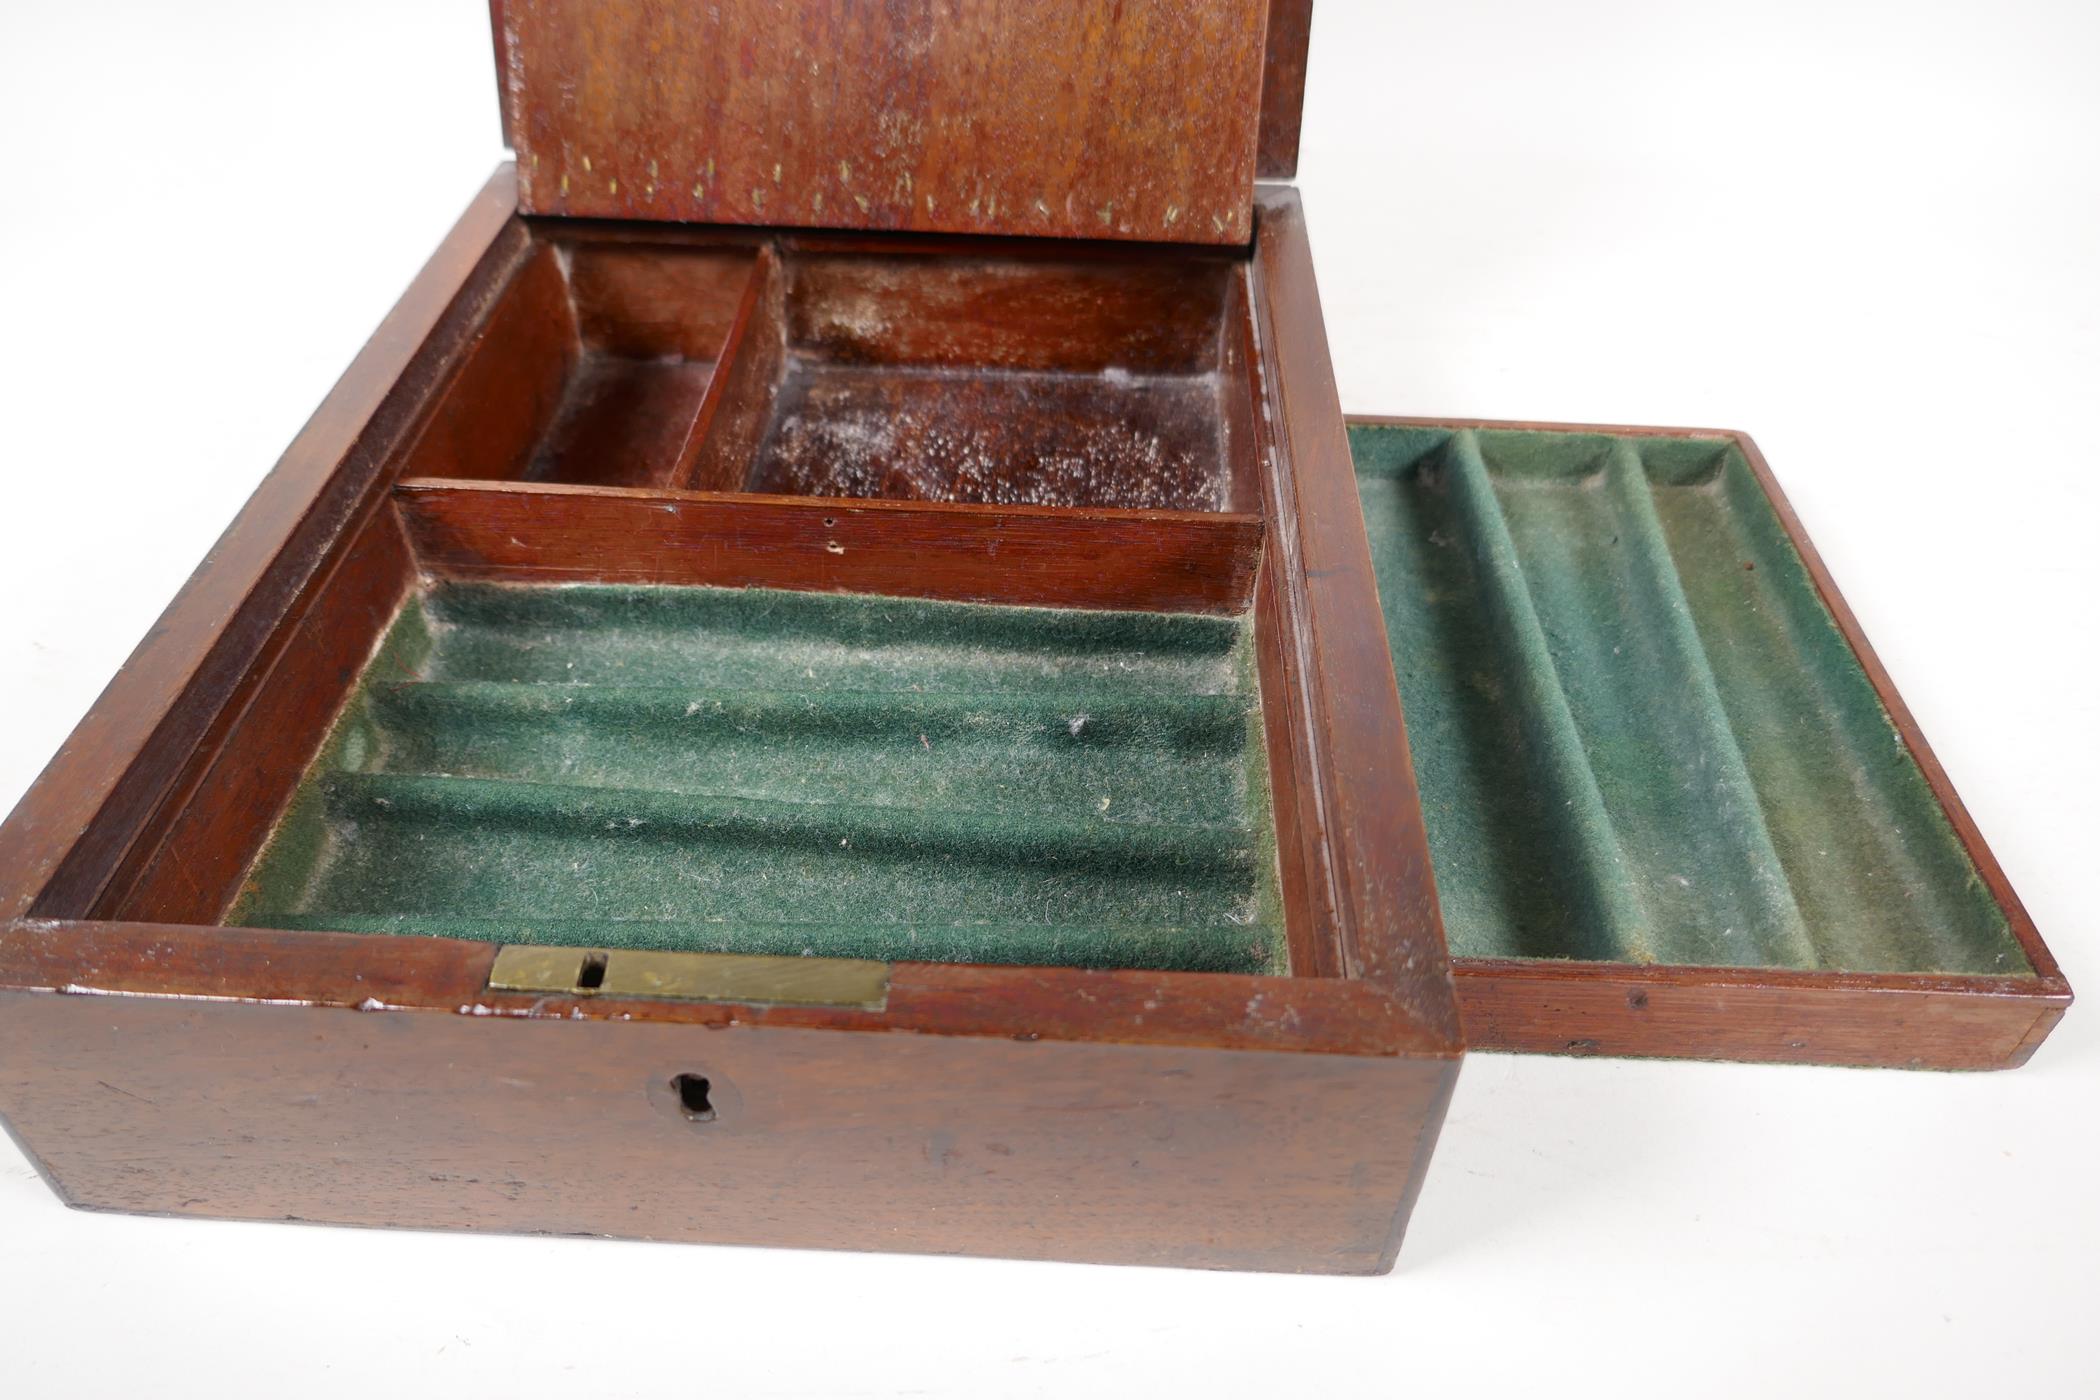 A C19th mahogany vanity box with mirror and fitted trays, 8" x 11" x 3" - Image 2 of 4